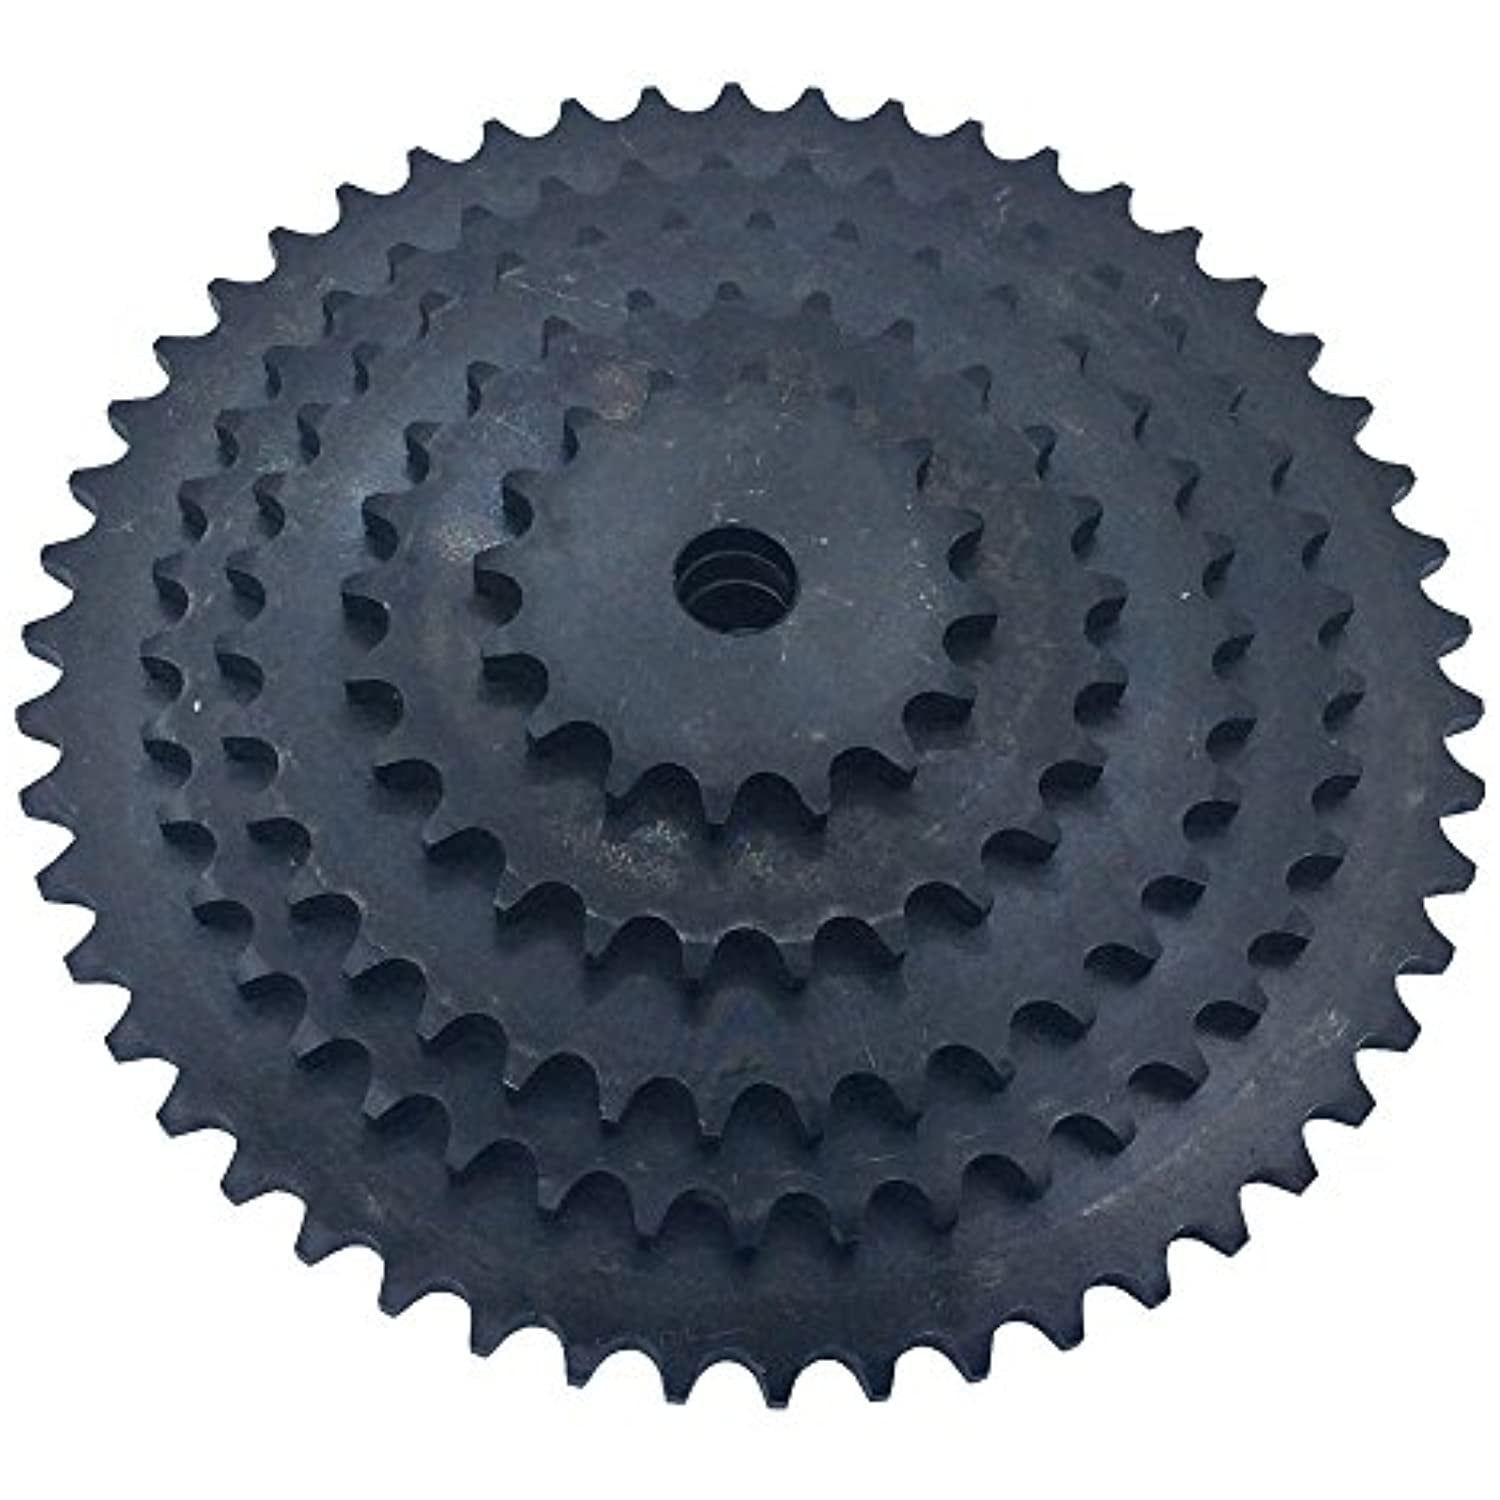 KOVPT # 40 Chain Plate Sprocket 49 Teeth Bore 0.719 Pitch 1/2 OD 8.088 Carbon Steel Black 1Pcs 